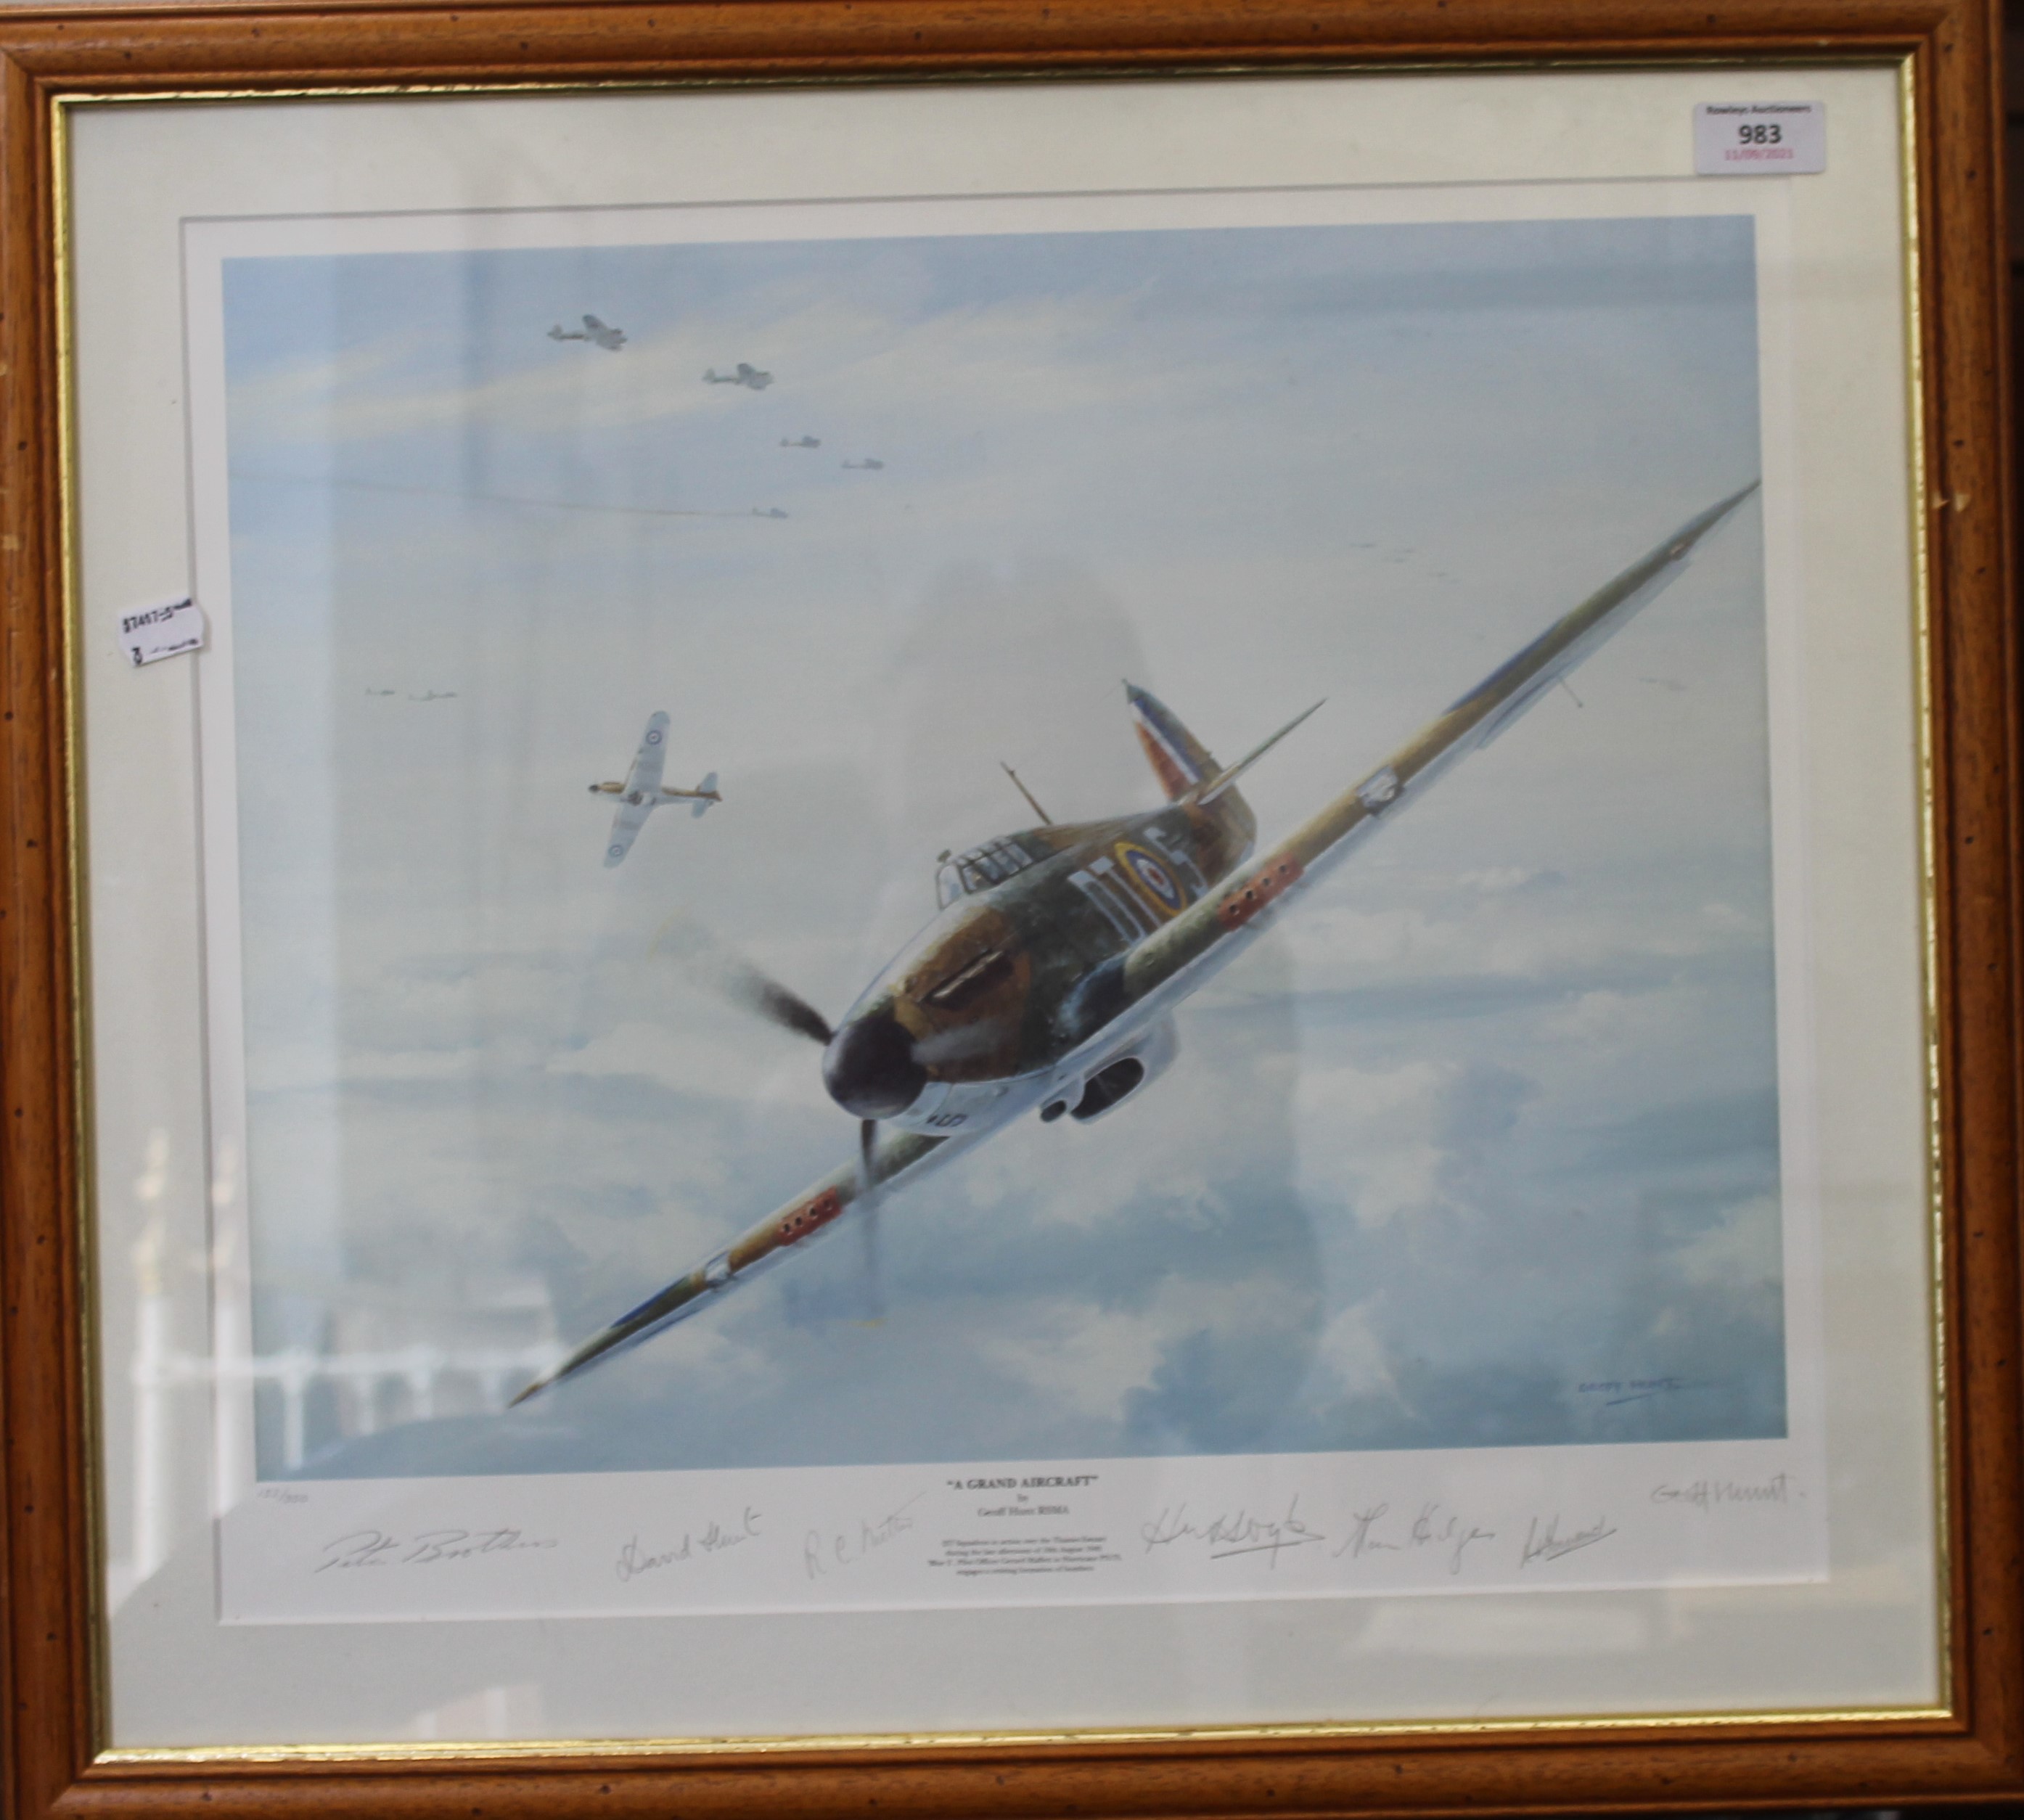 GEOFF HUNT, A Grand Aircraft, limited edition print, numbered 152/950, - Image 2 of 6